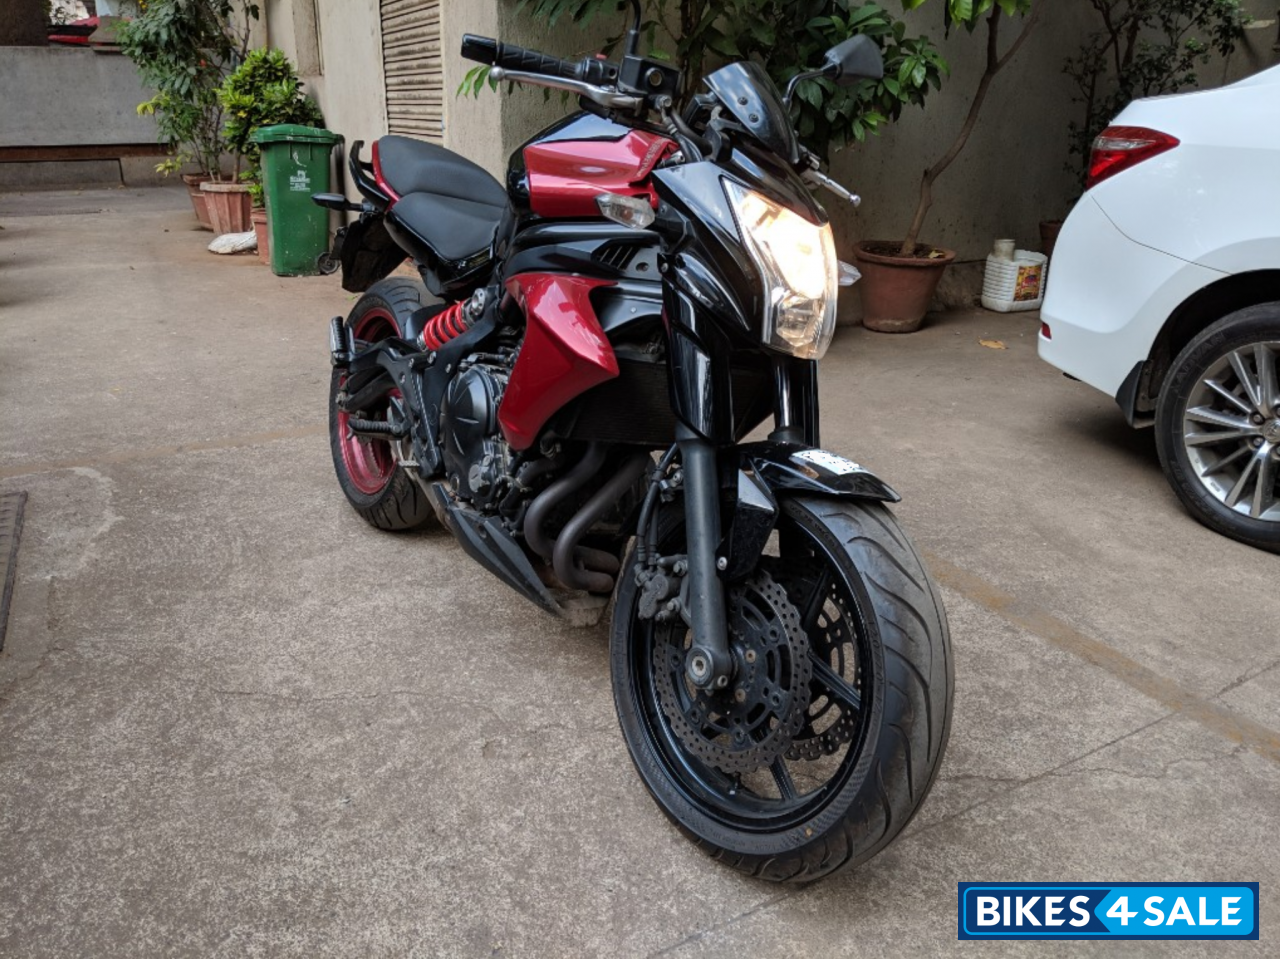 Used 2014 model ER-6n for sale in Mumbai. ID 214089. Black/red colour Bikes4Sale